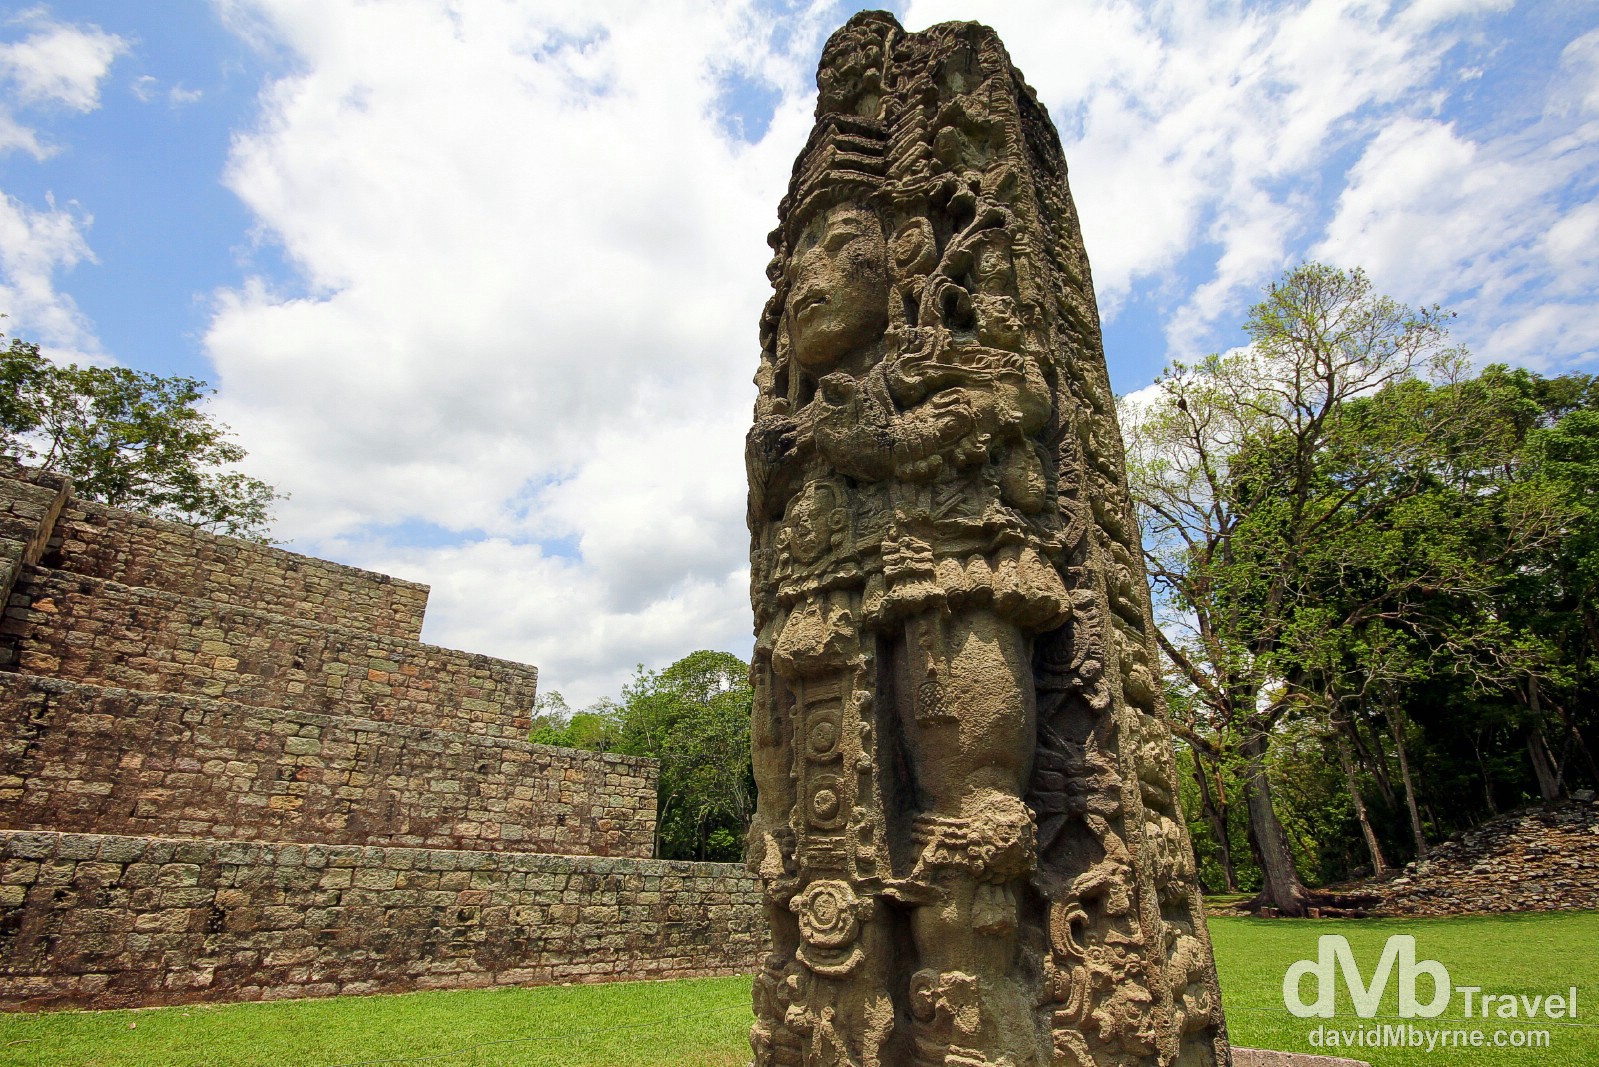 Stelae 3 in the Great Plaza of the Copan Architectural Site, western Honduras. June 7th 2013.